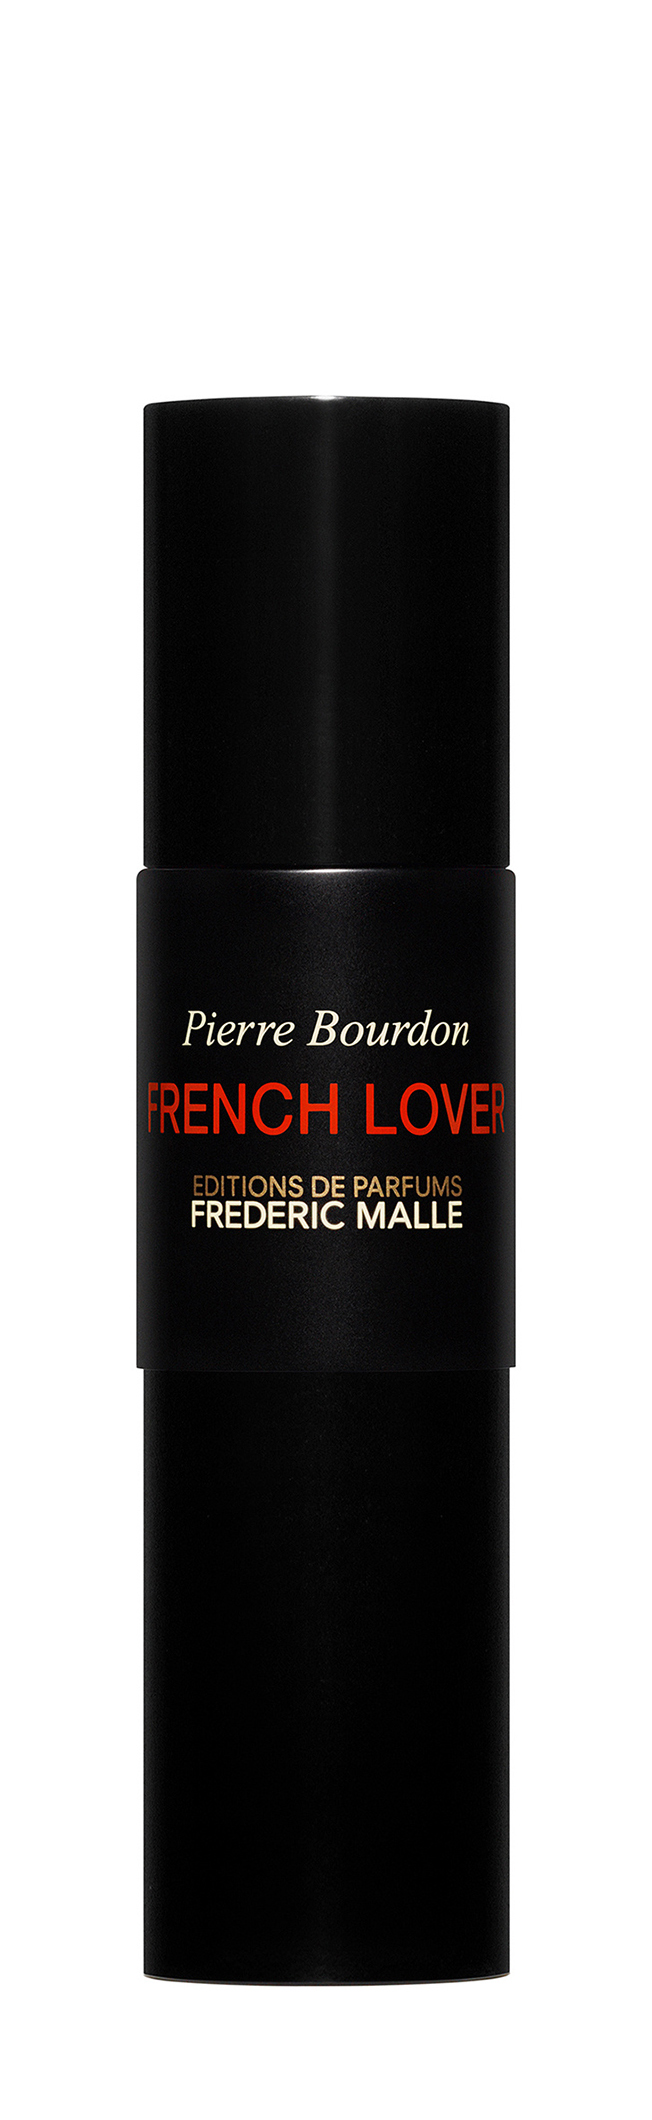 Парфюмерная вода FREDERIC MALLE French Lover 30 мл